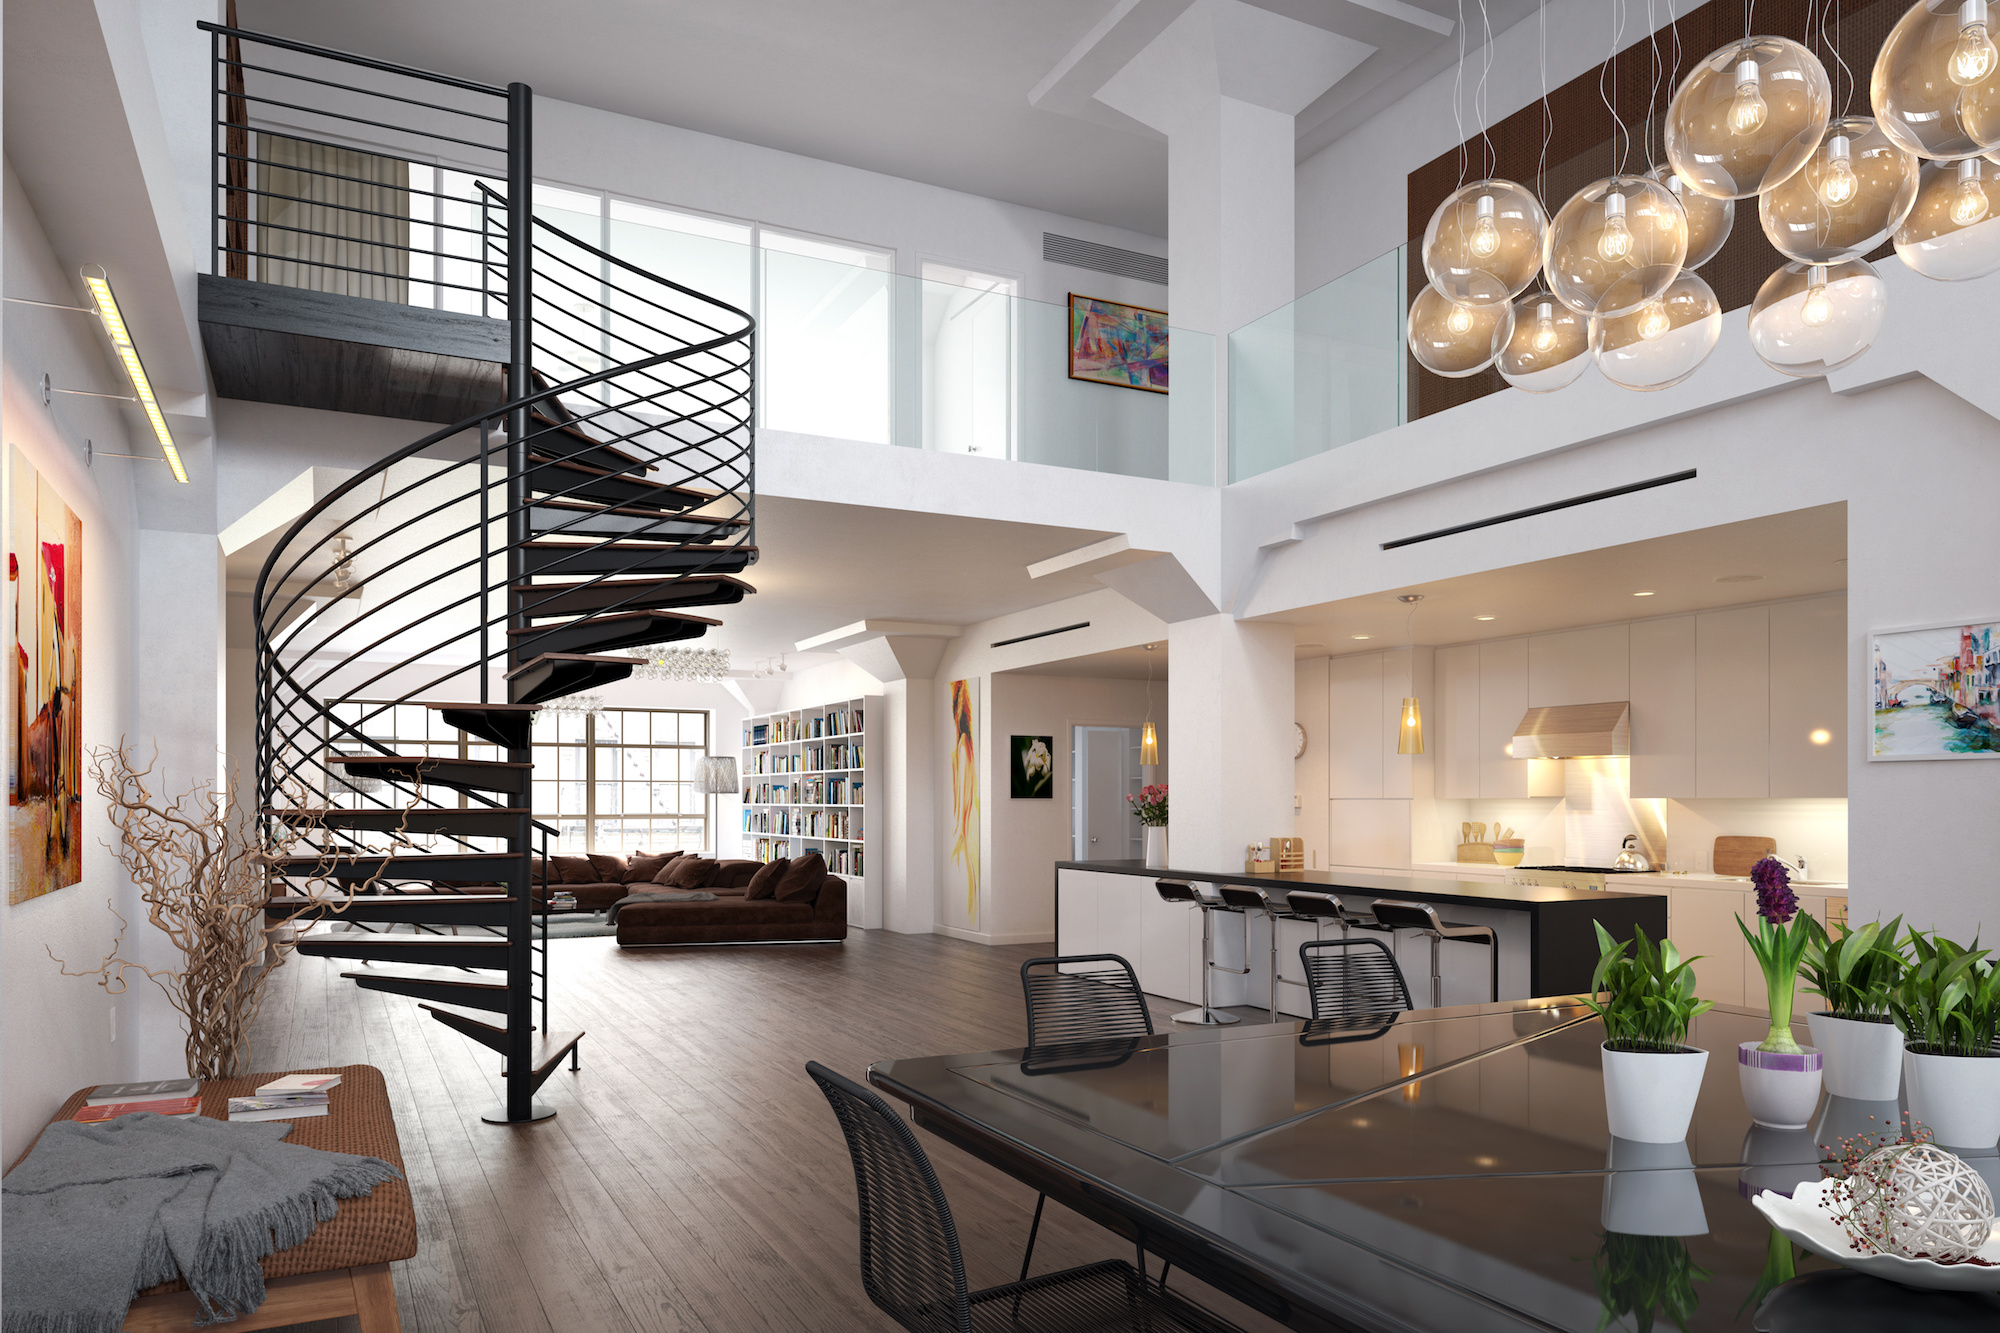 Interior of a penthouse apartment with a staircase and vaulted ceiling.